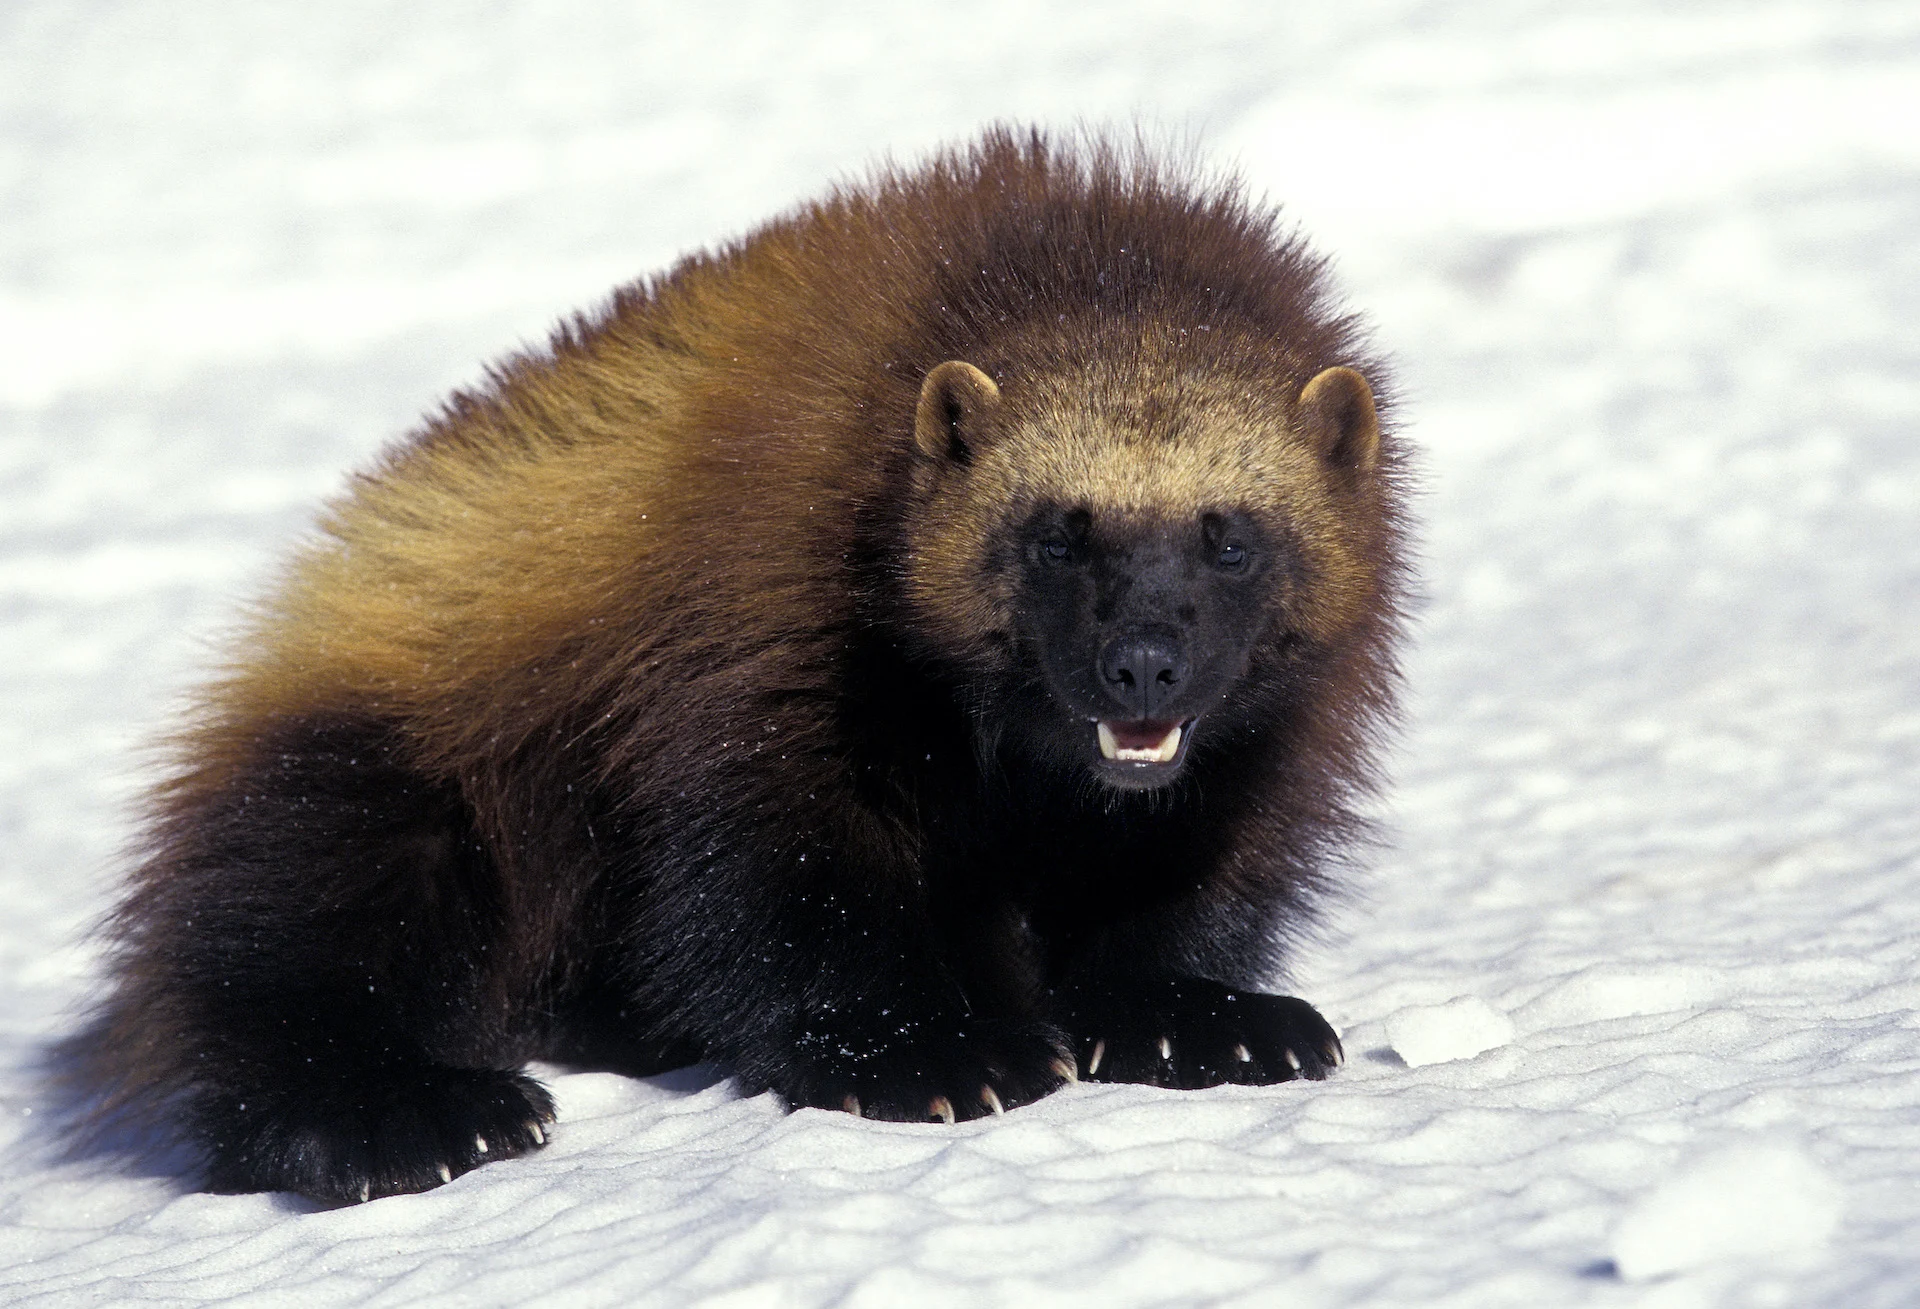 U.S. lists wolverine as threatened species, citing climate change